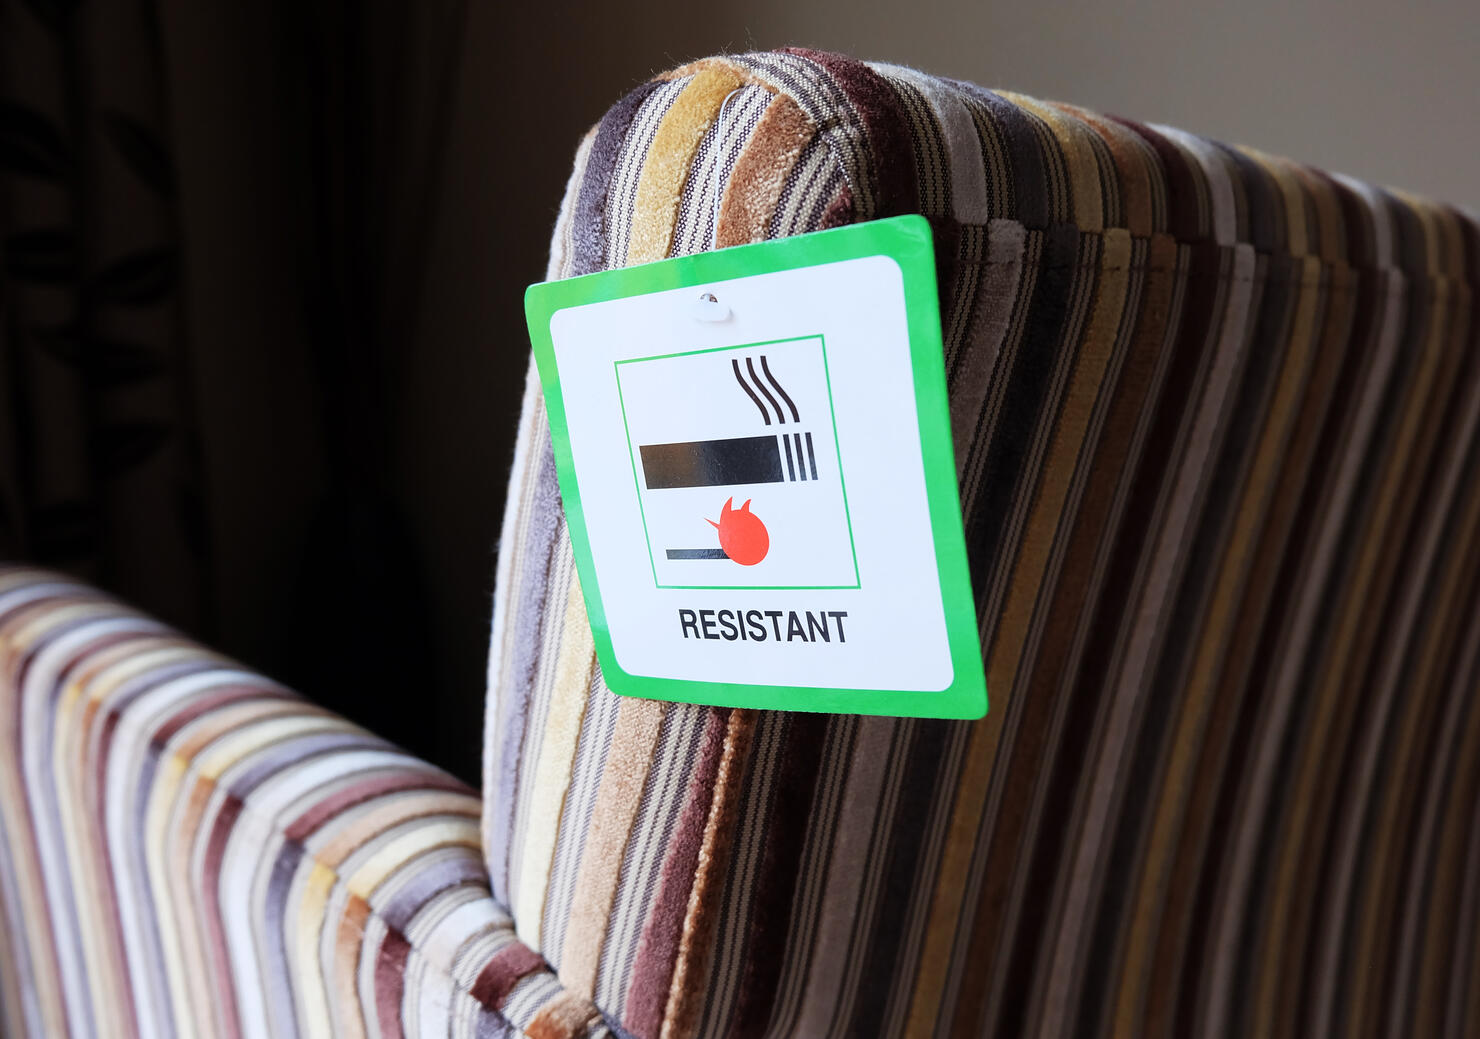 Flame resistant label attached to furniture